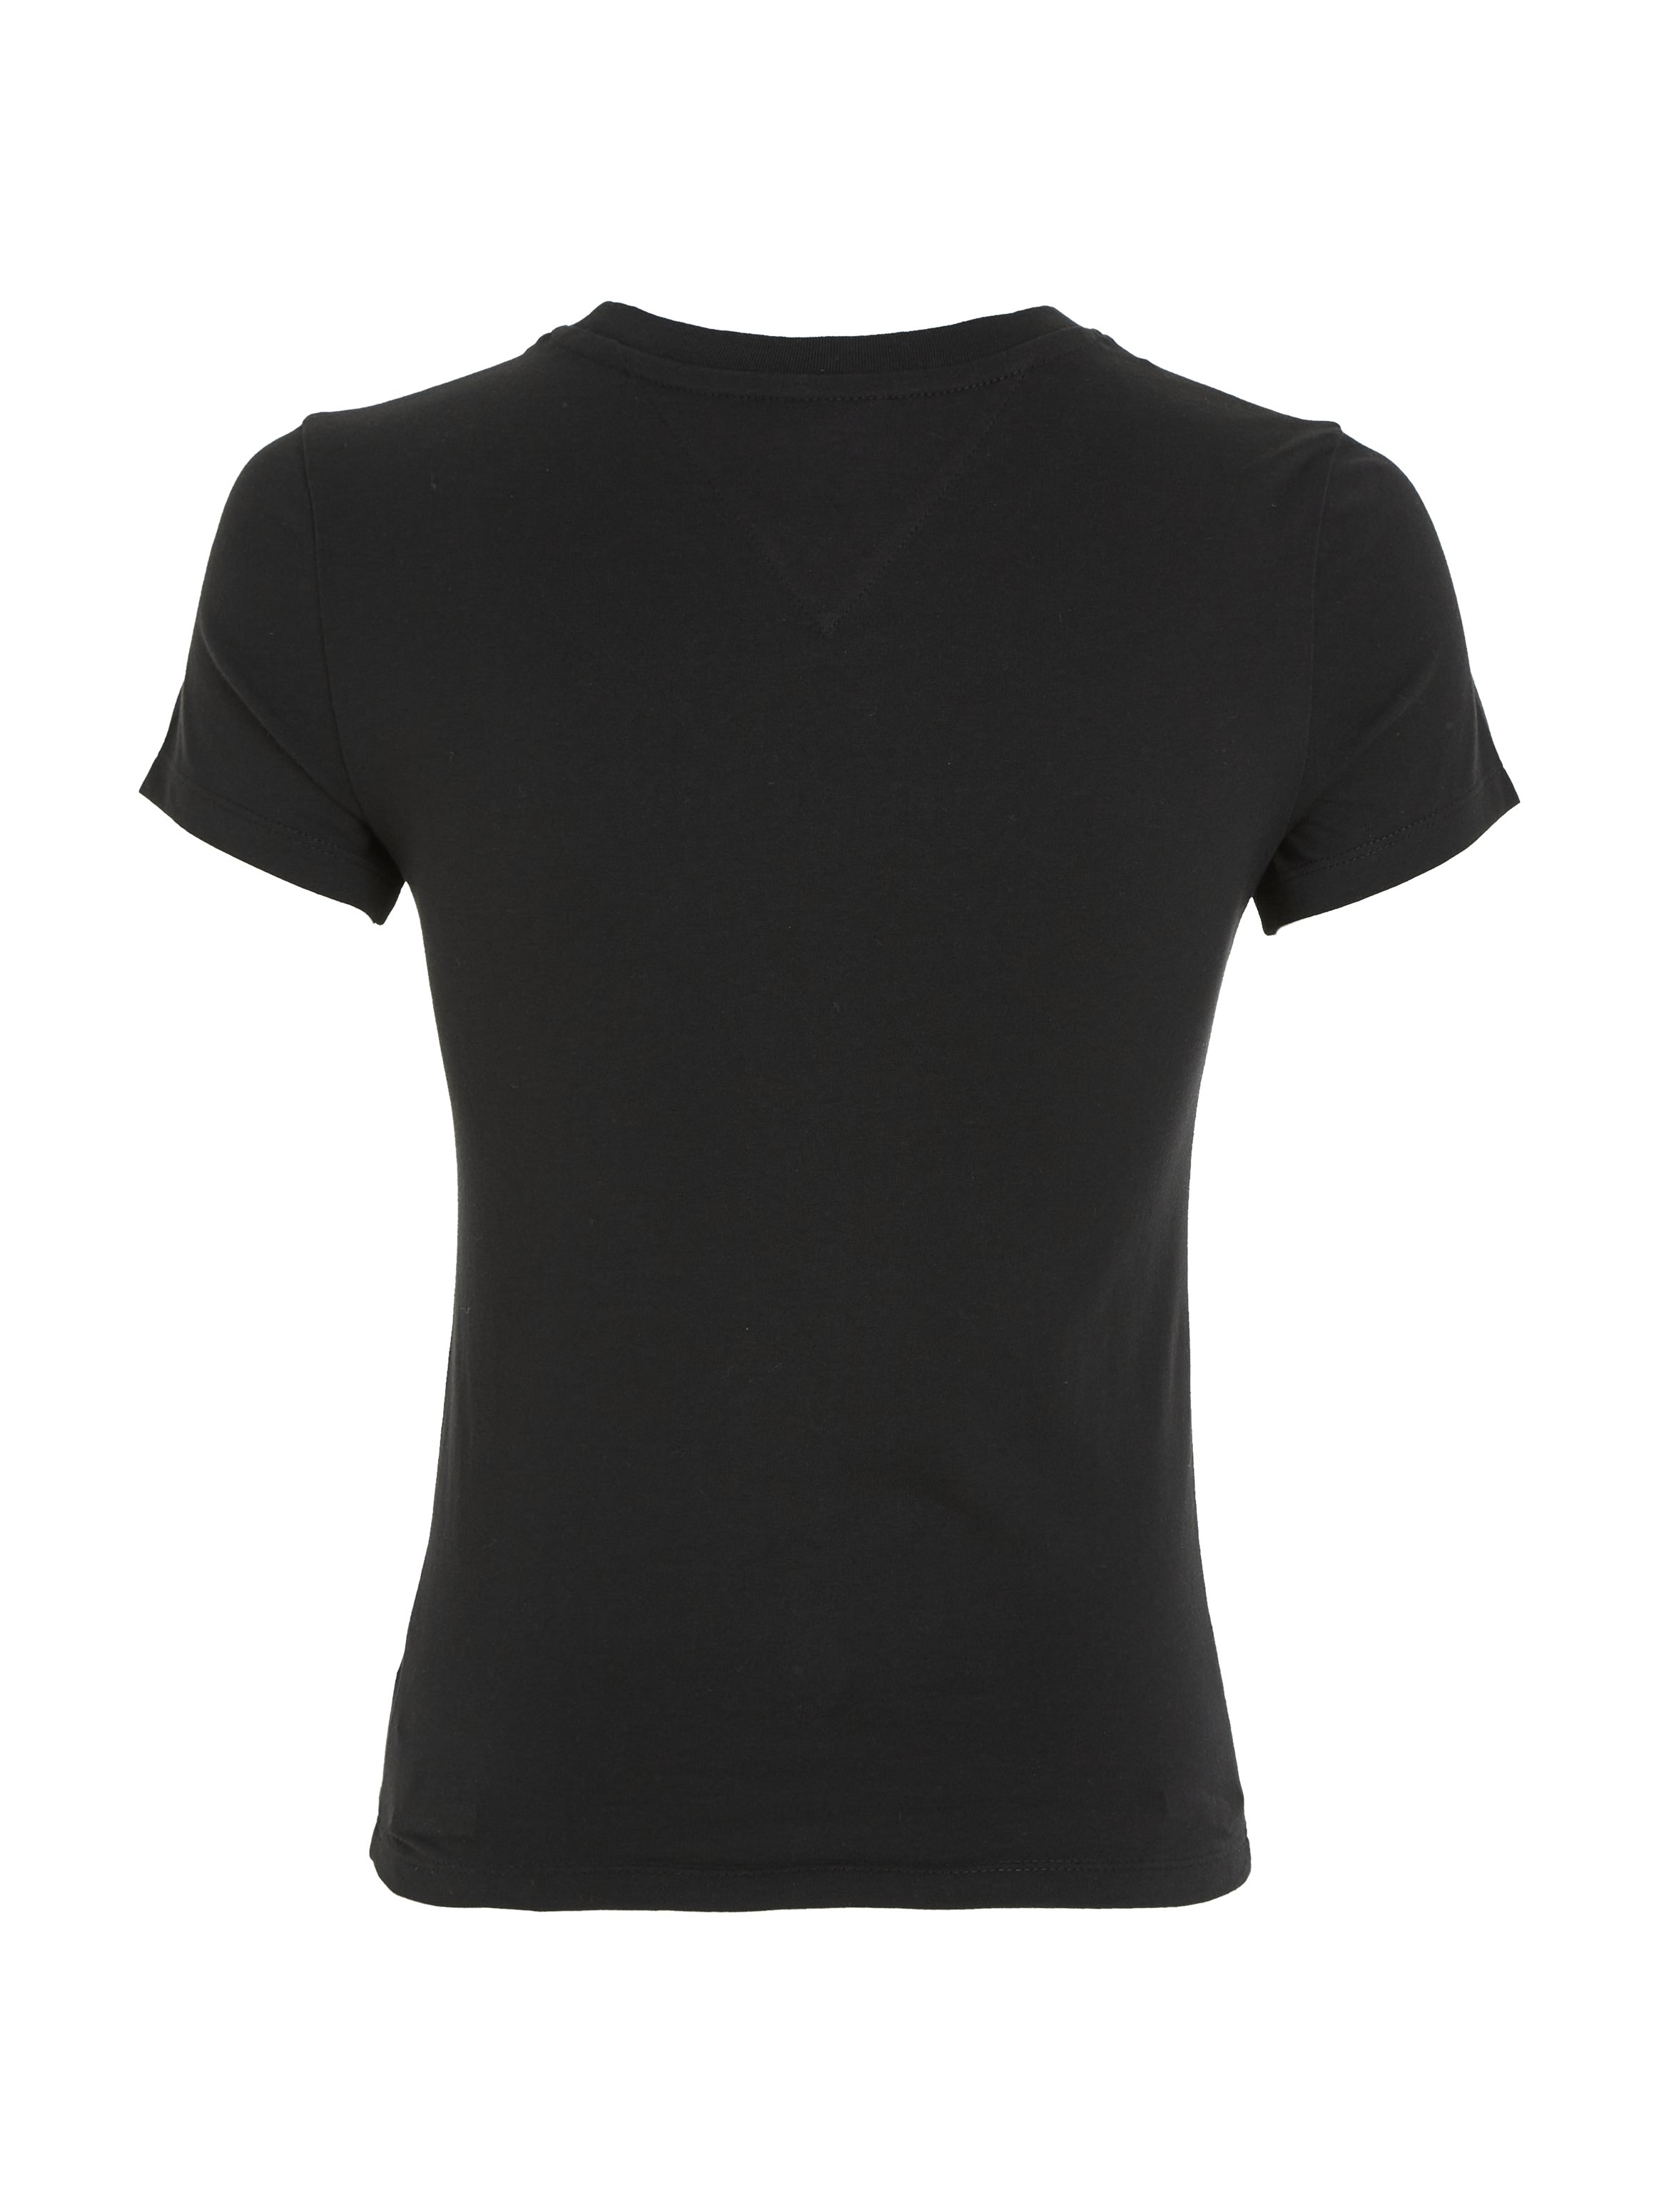 Tommy Jeans Curve T-shirt TJW SLIM LINEAR TEE SS EXT in de online shop |  OTTO